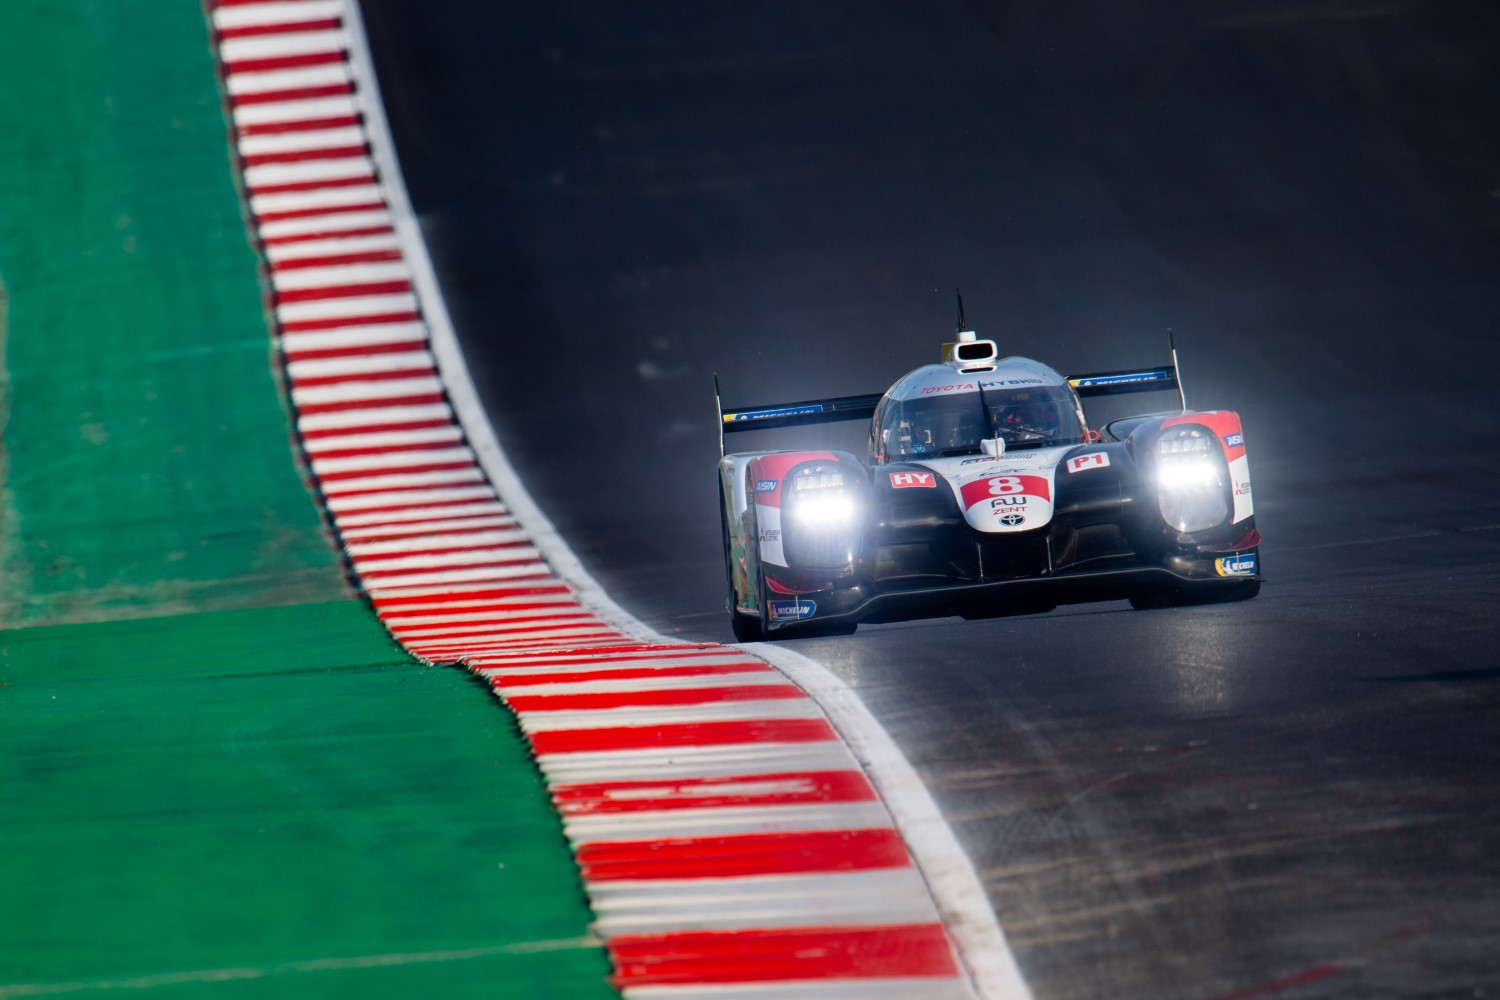 Cars designed to race 24-hours are almost as fast as today's IndyCars